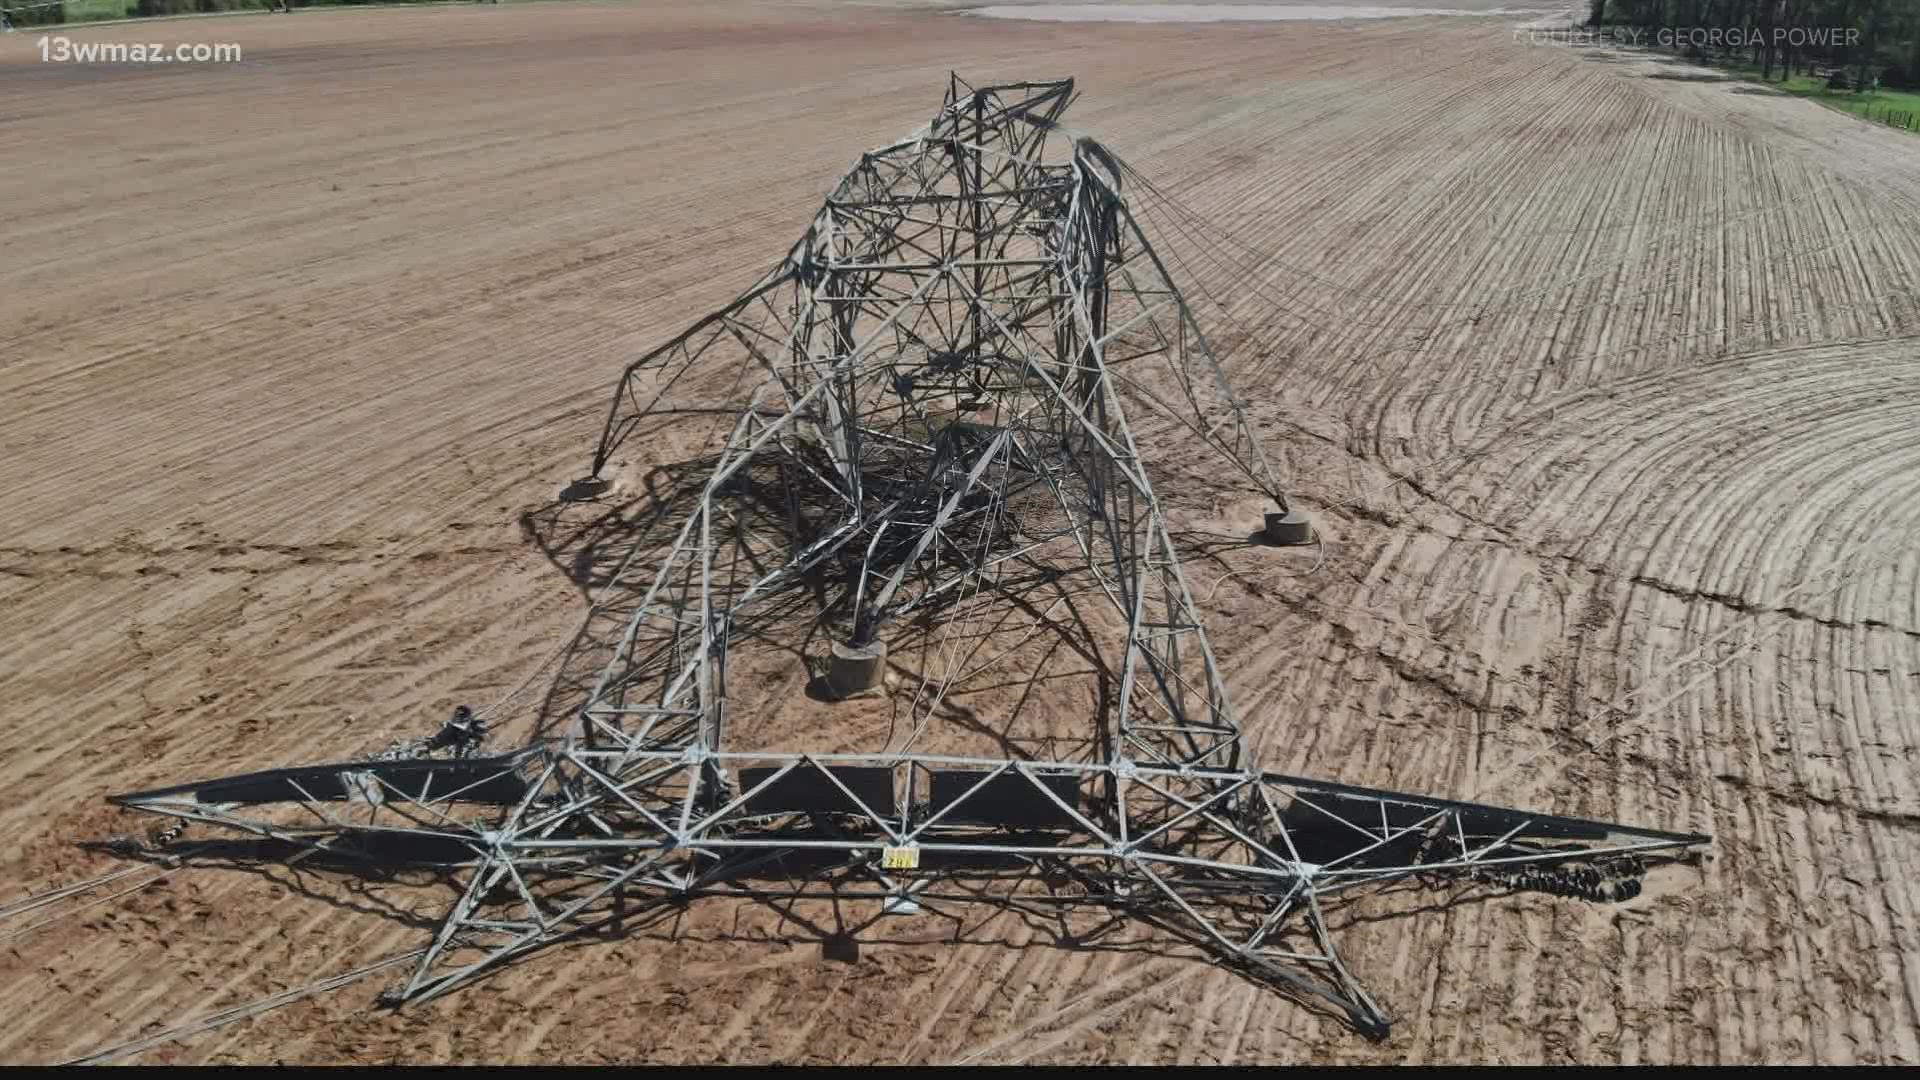 The powerful winds even toppled two out of three 50,000-pound power transmission towers in Houston County.